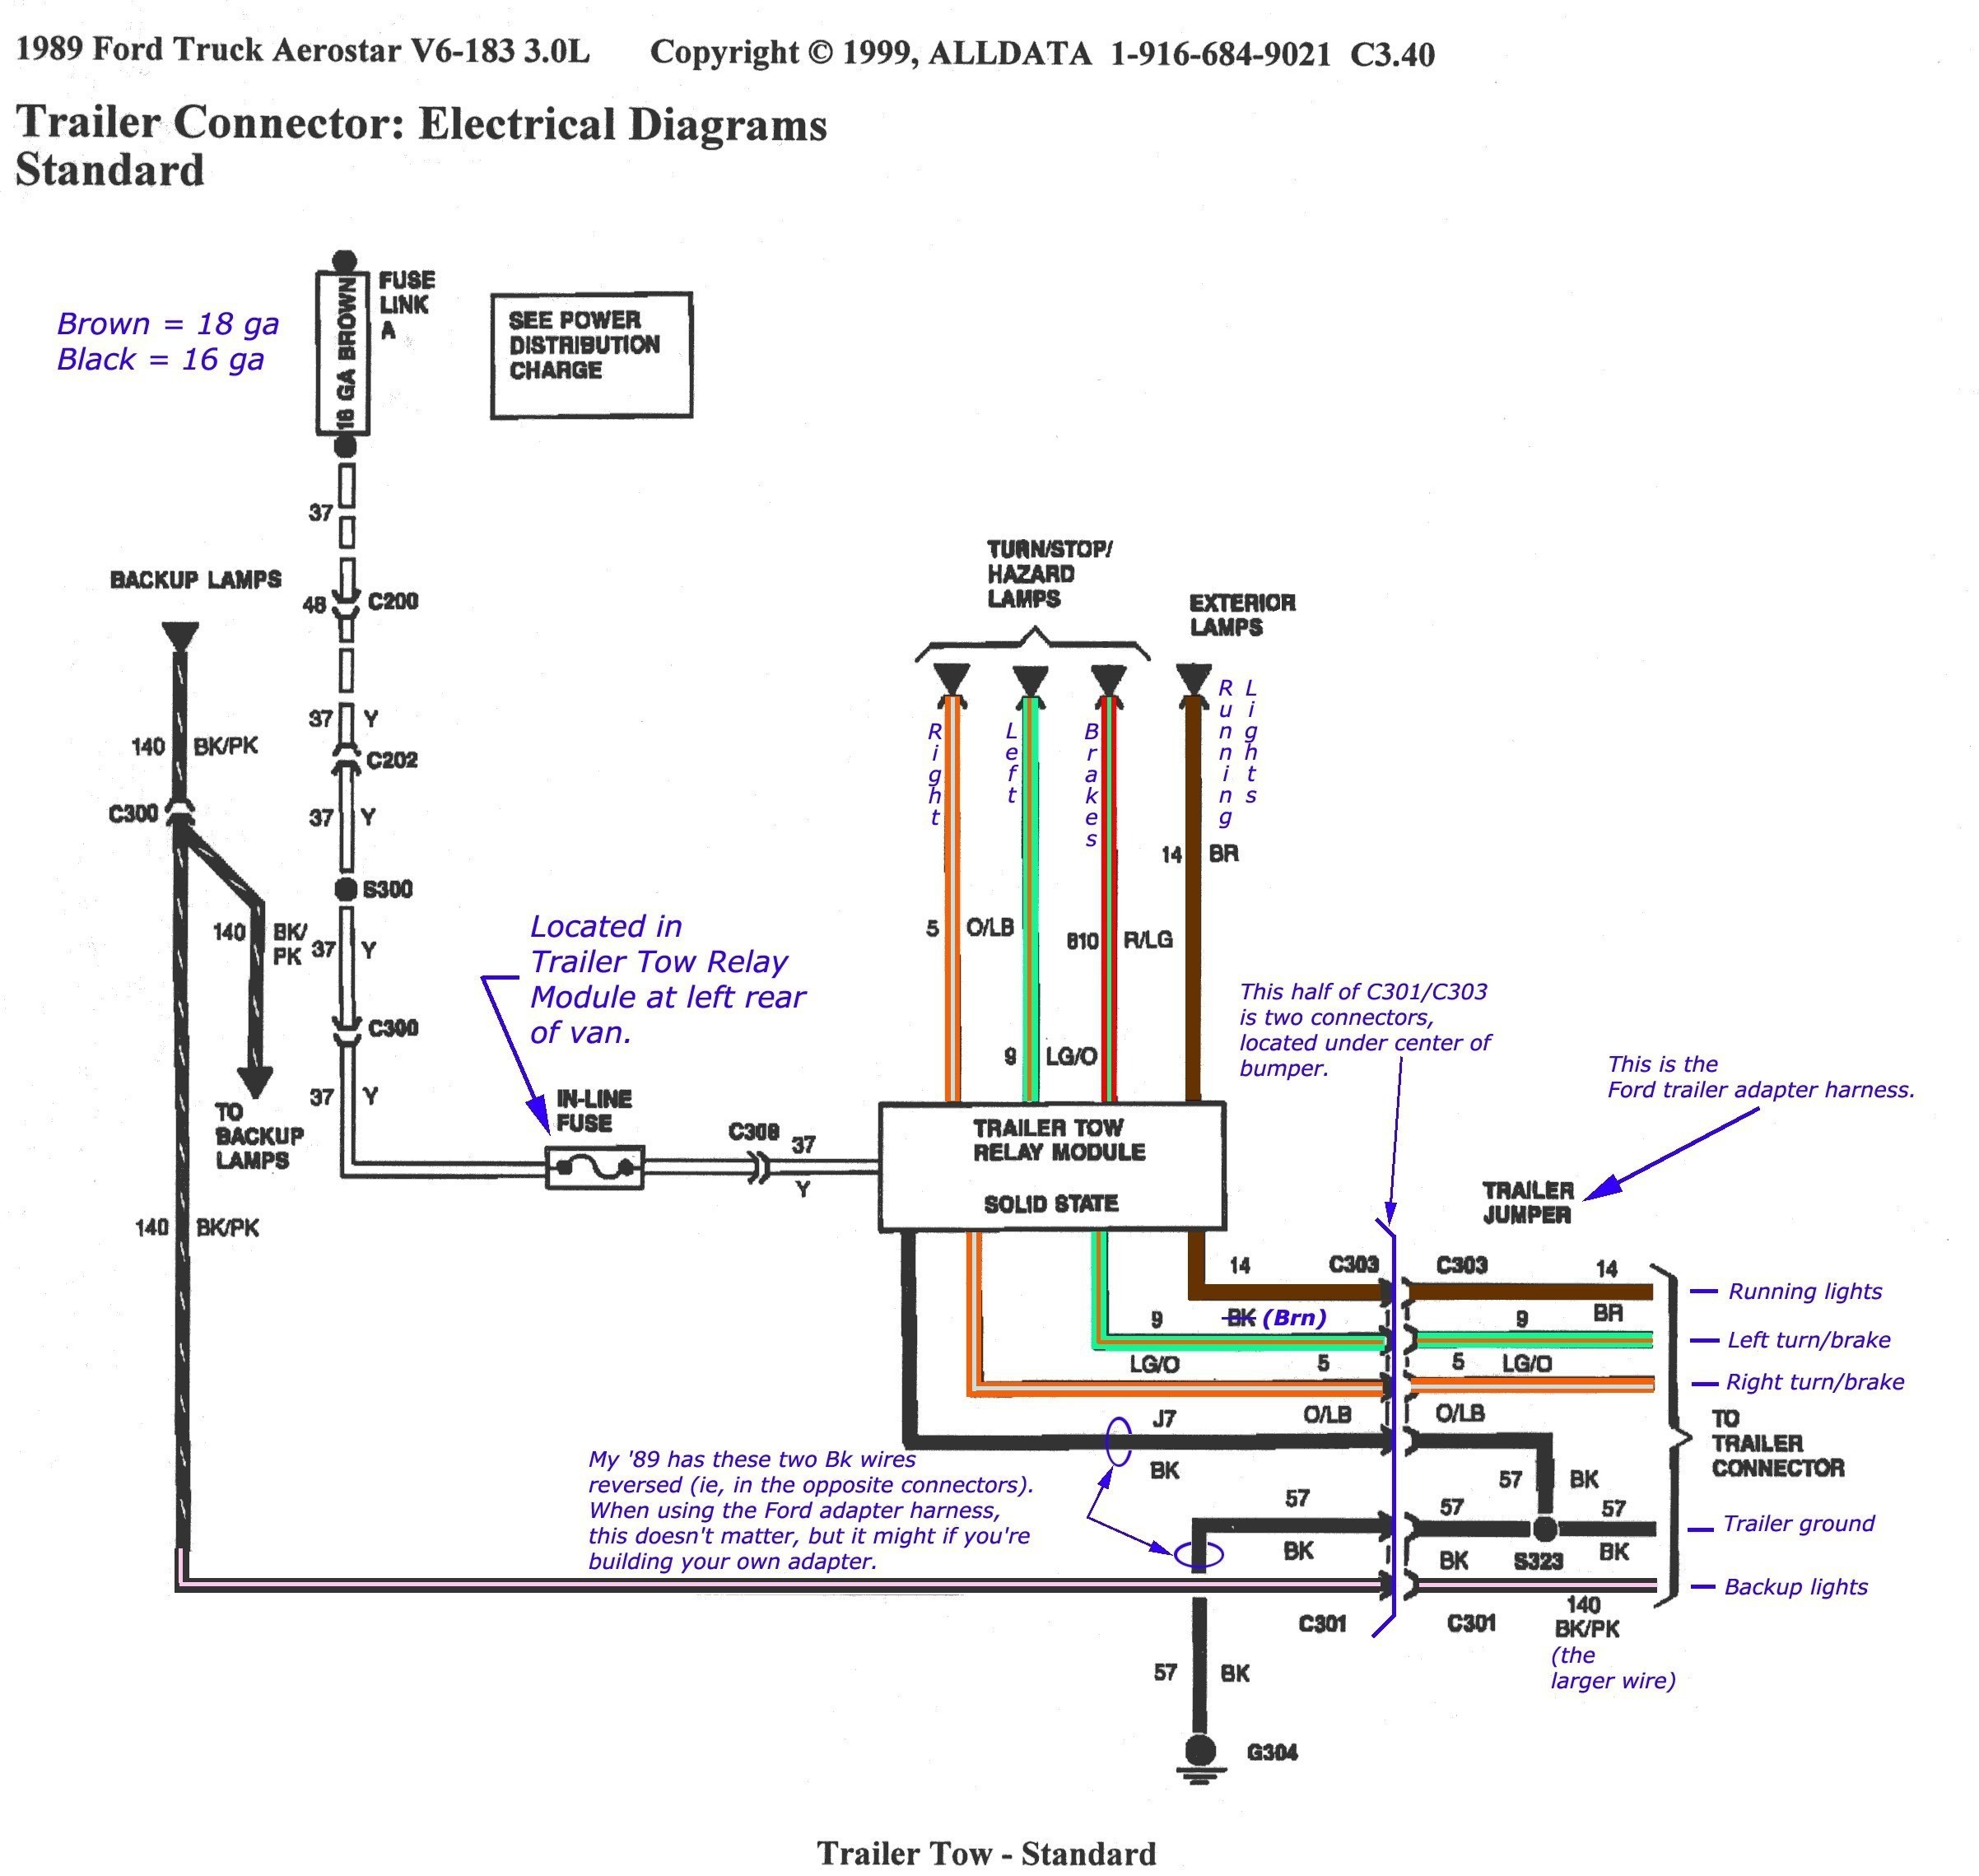 Wiring Diagrams for Utility Trailer Best Utility Trailer Wiring Utility Trailer Wiring Diagram Sample